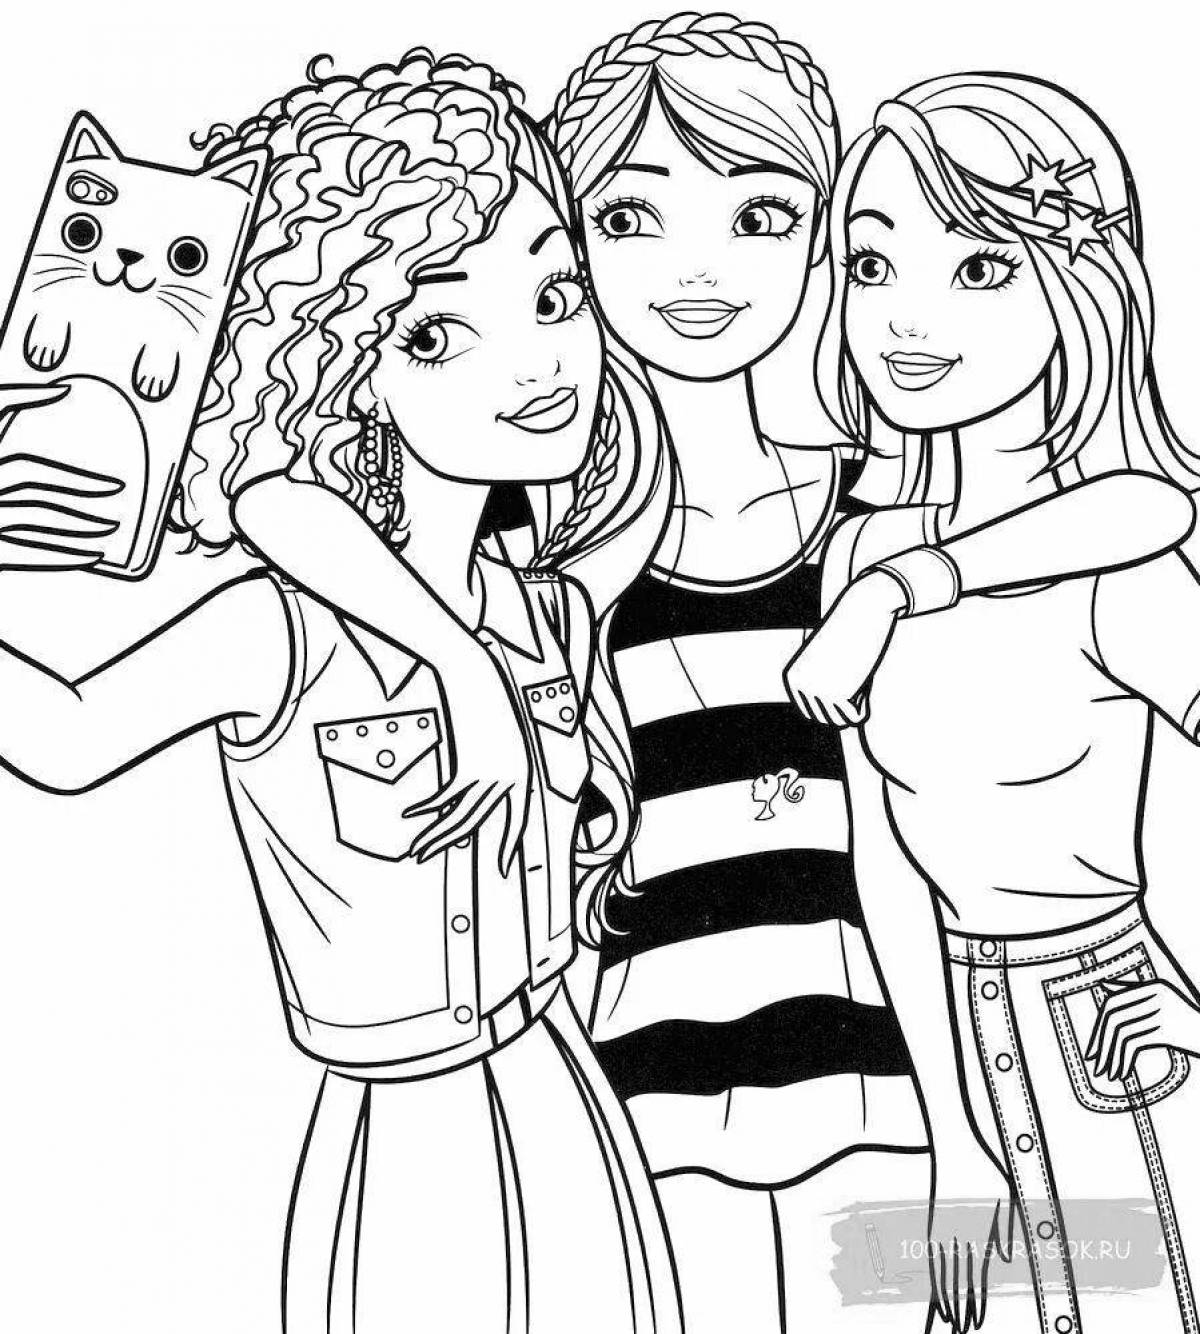 Great coloring book for girls 10-12 years old